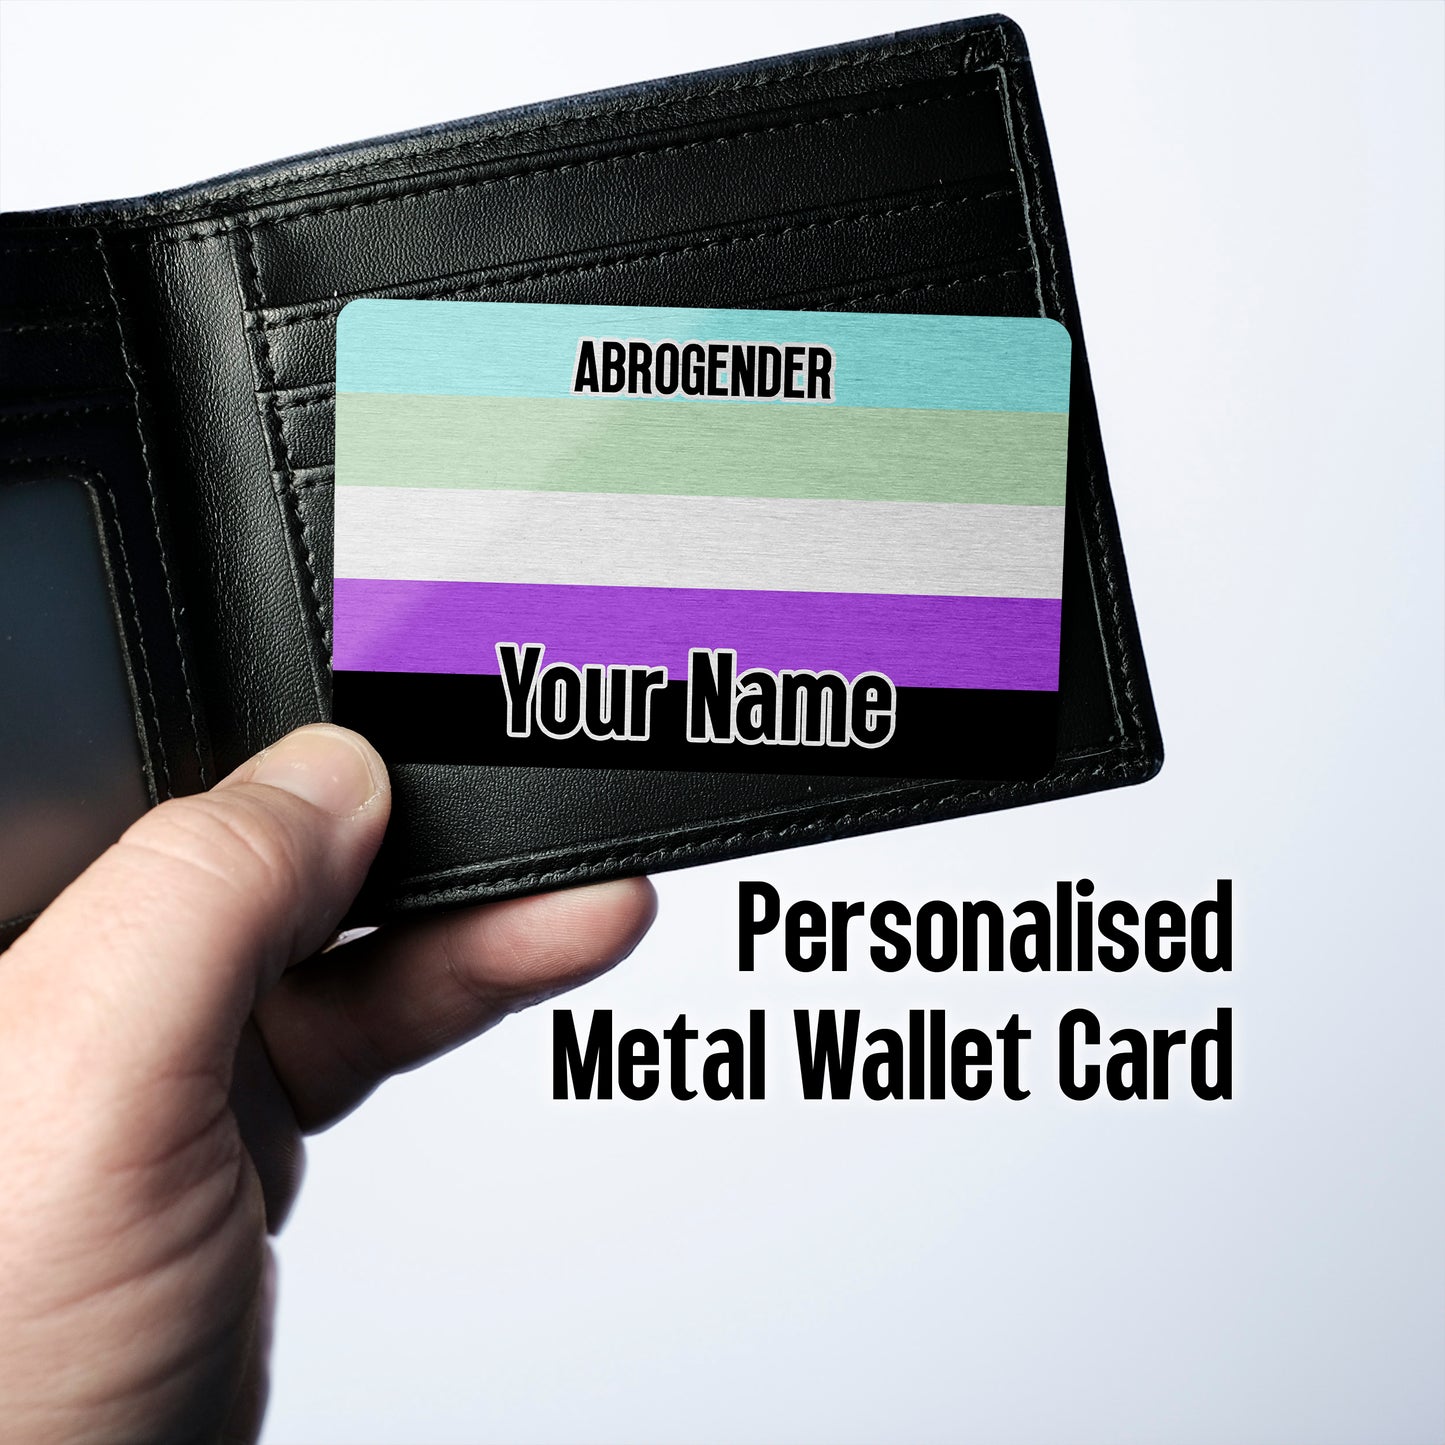 Aluminium metal wallet card personalised with your name and the abrogender pride flag